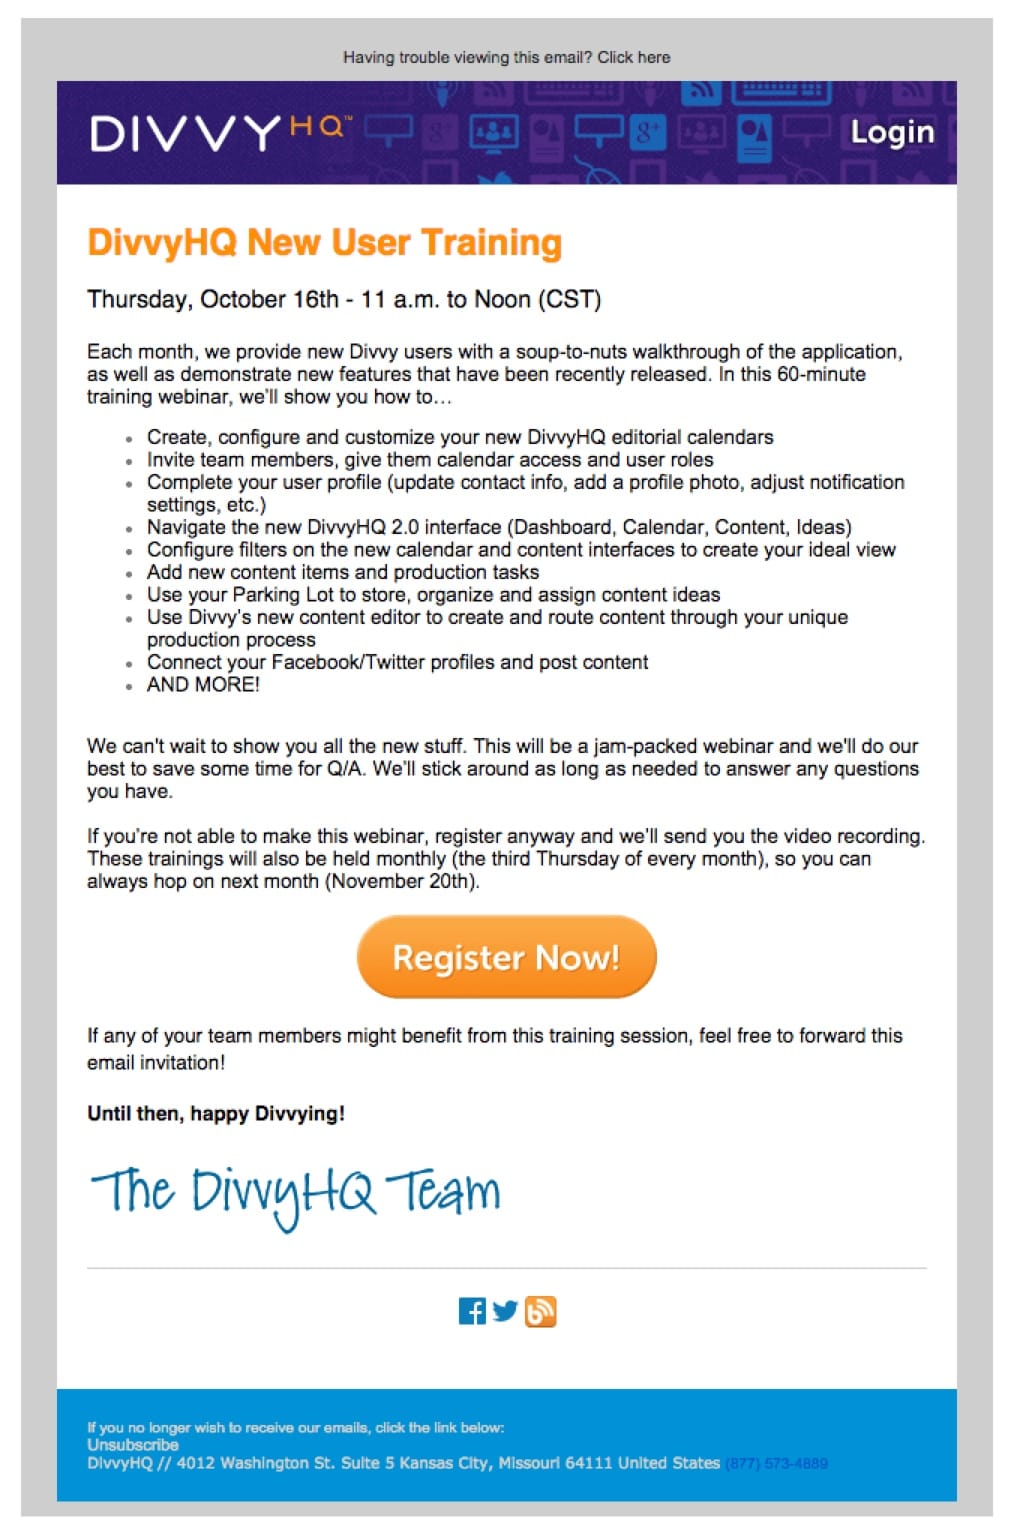 promotional email example divvy (invitation email)